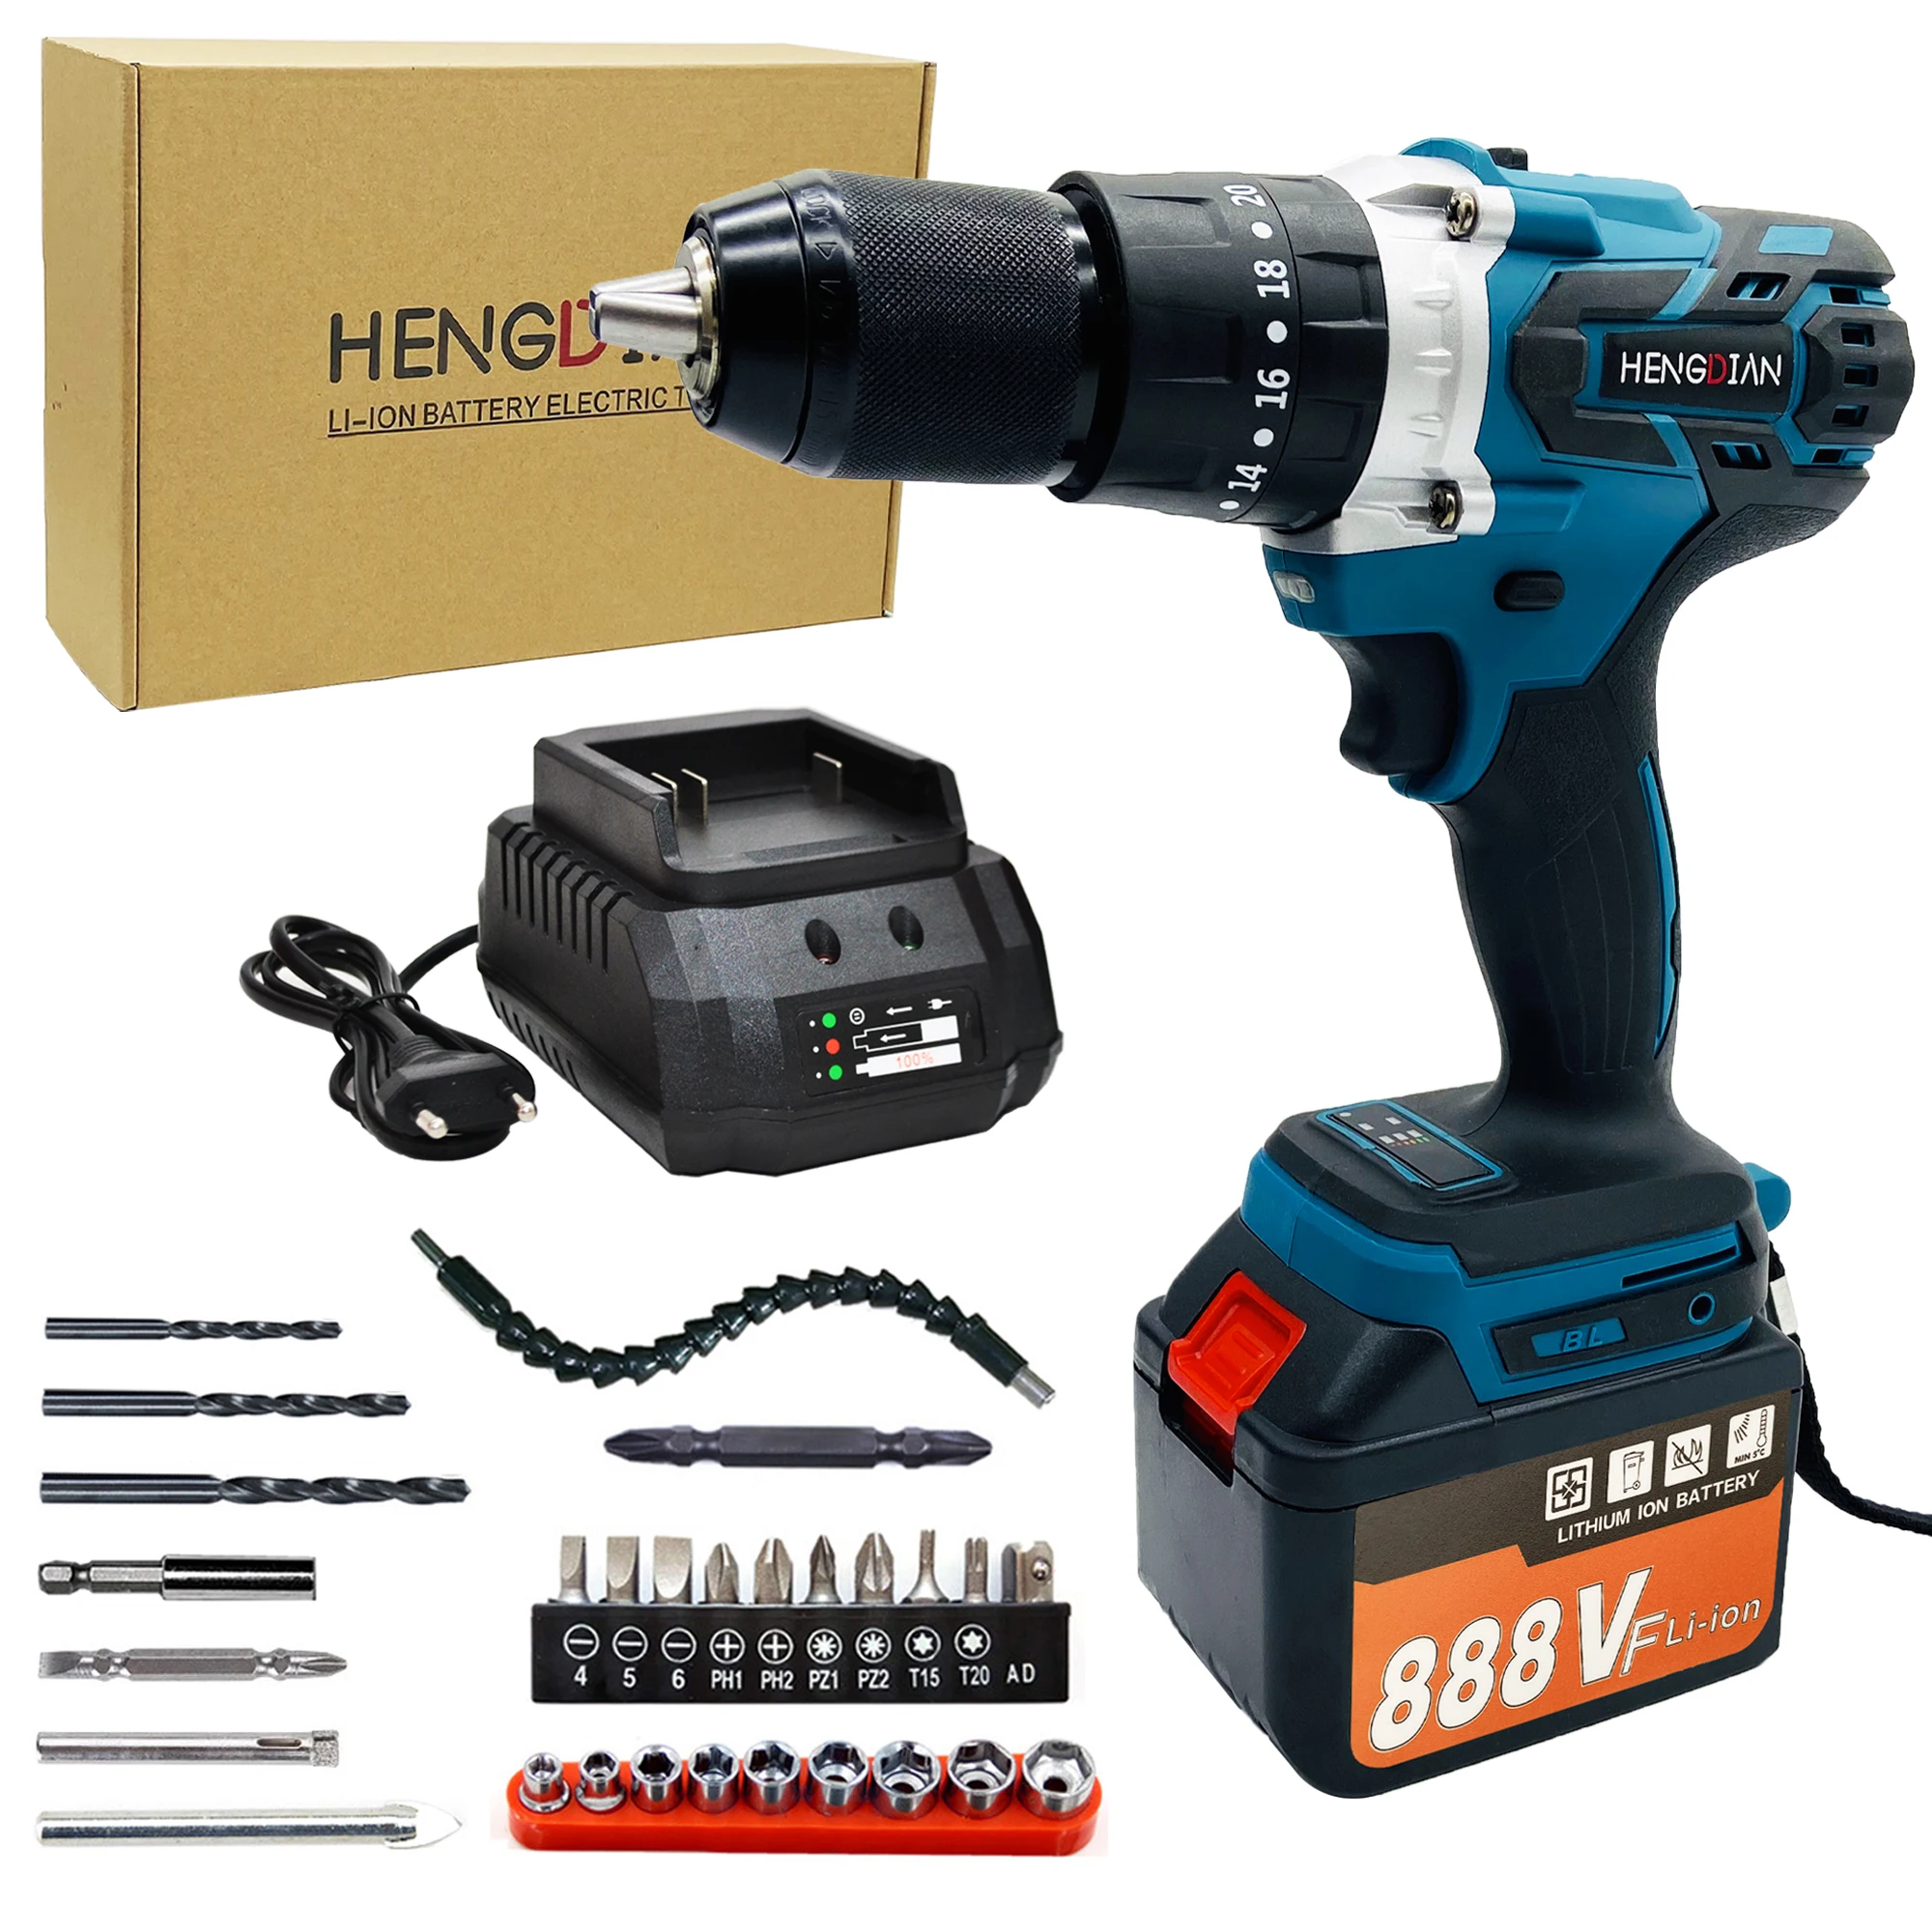 20V Brushless Battery Screwdriver Craft Drill Set Adjustable Torque Machine Impact Cordless Power Tools Electric Drill professional nail drill machine wireless brush power driven screwdriver toolbox mini portable worx impact drill hardware goods